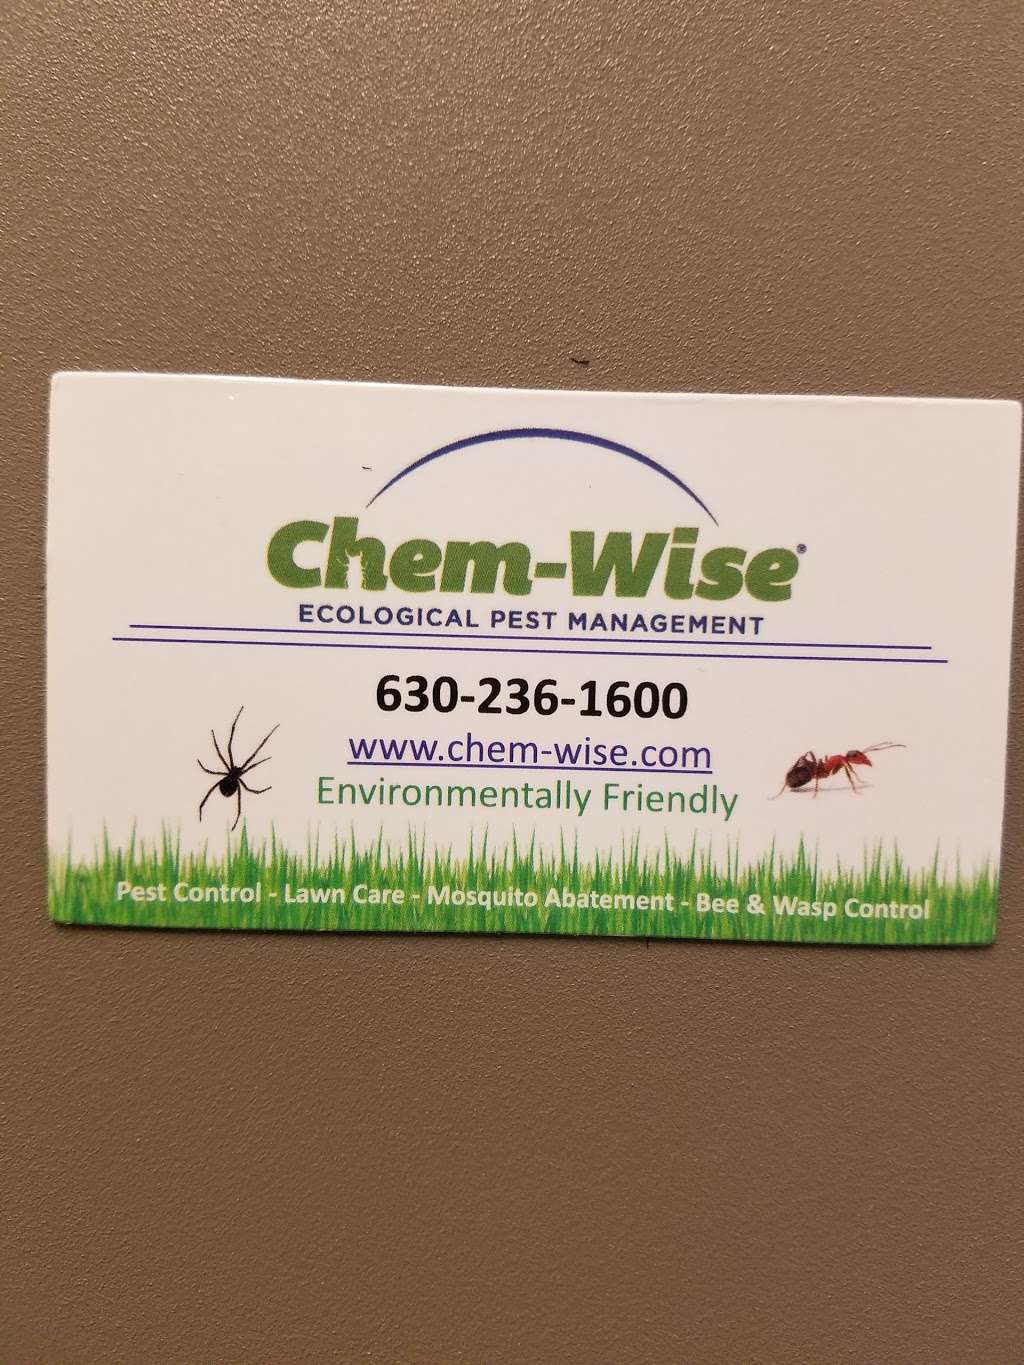 Chem-Wise Ecological Pest Management | 2600 Beverly Dr #106, Aurora, IL 60502 | Phone: (630) 236-1600